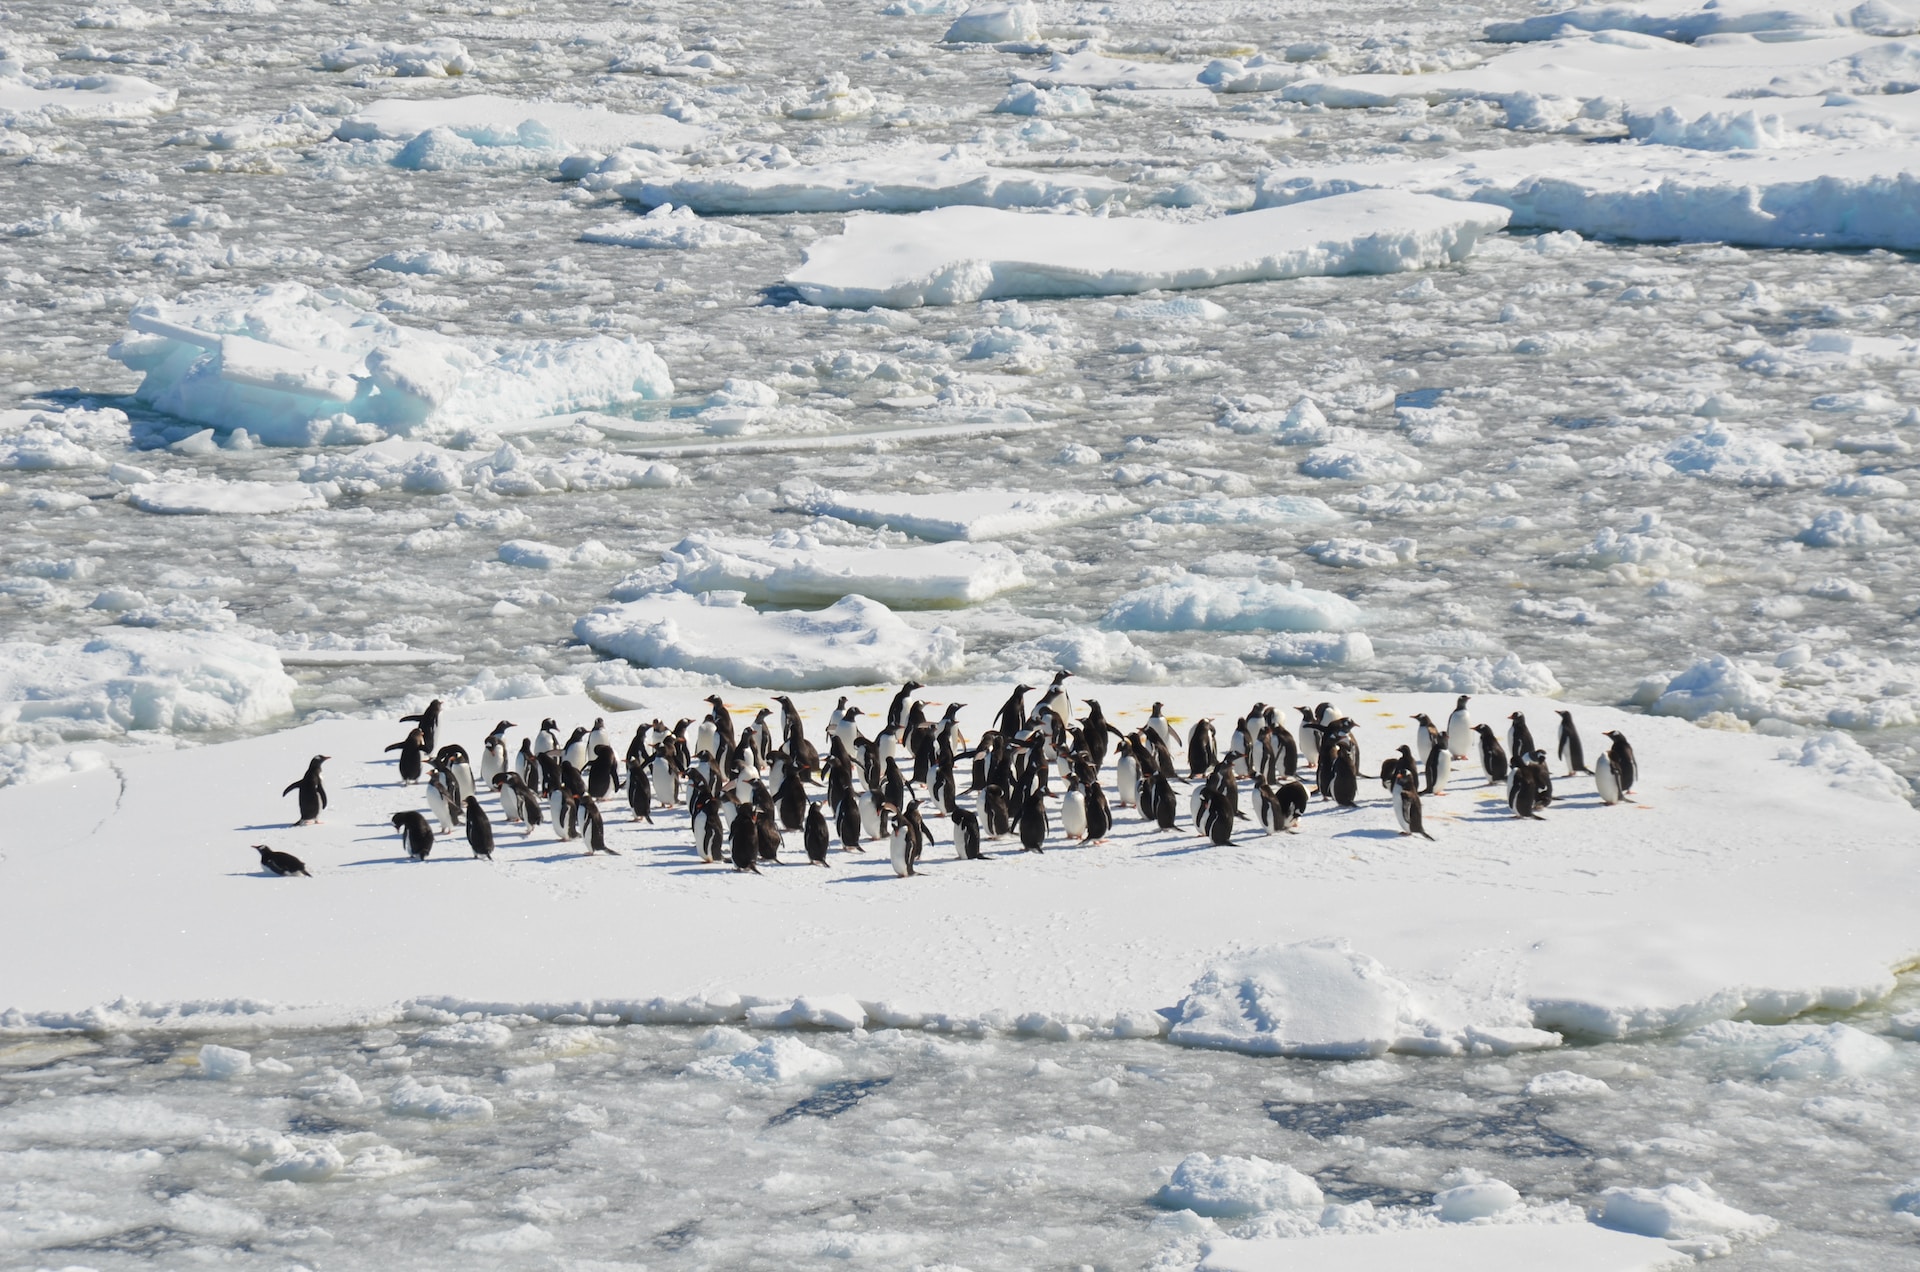 A collection of about 50 penguins standing in the middle of an ice floe